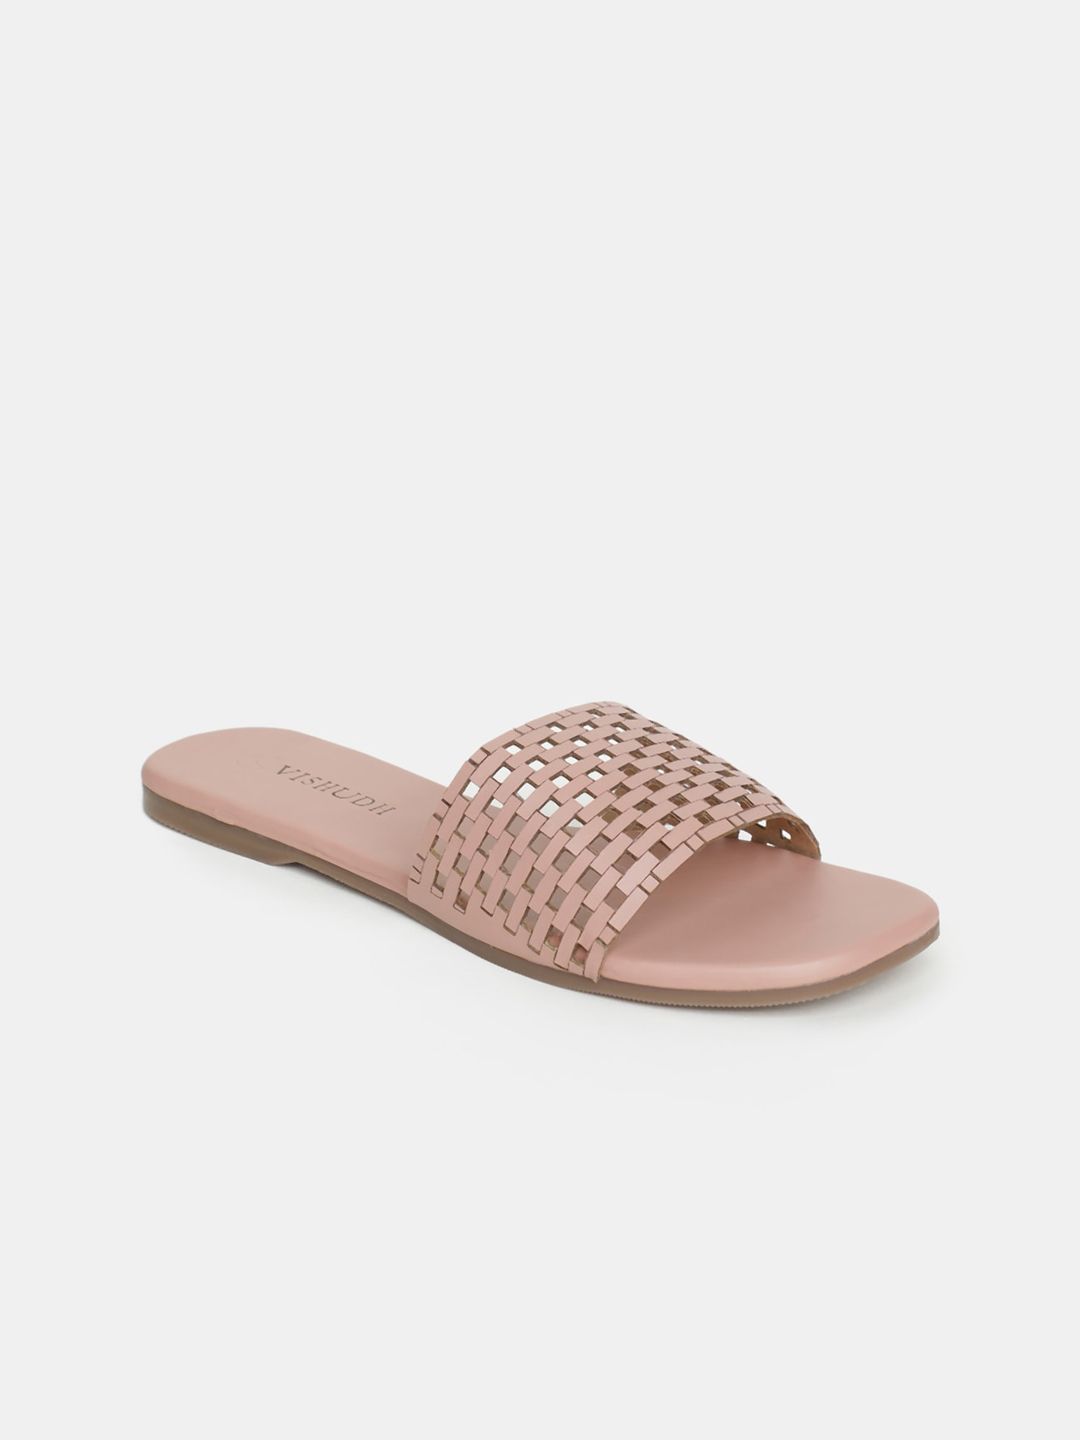 Vishudh Women Peach-Coloured Textured Open Toe Flats with Laser Cuts Price in India